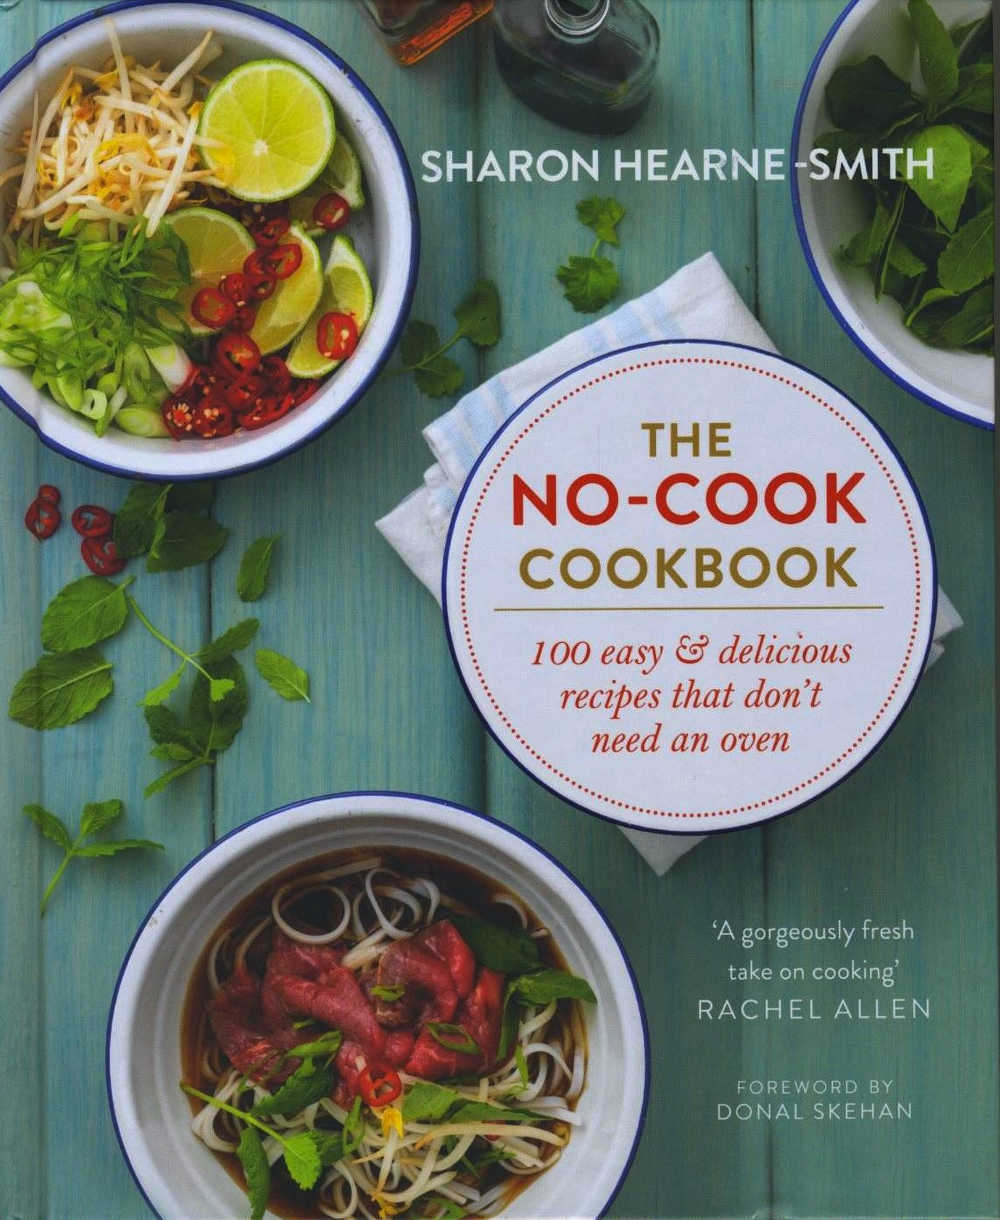 The No-Cook Cookbook (Quercus Books, €24.99/£20.00; also available in Kindle, £13.99; Foreword by Donal Skehan).